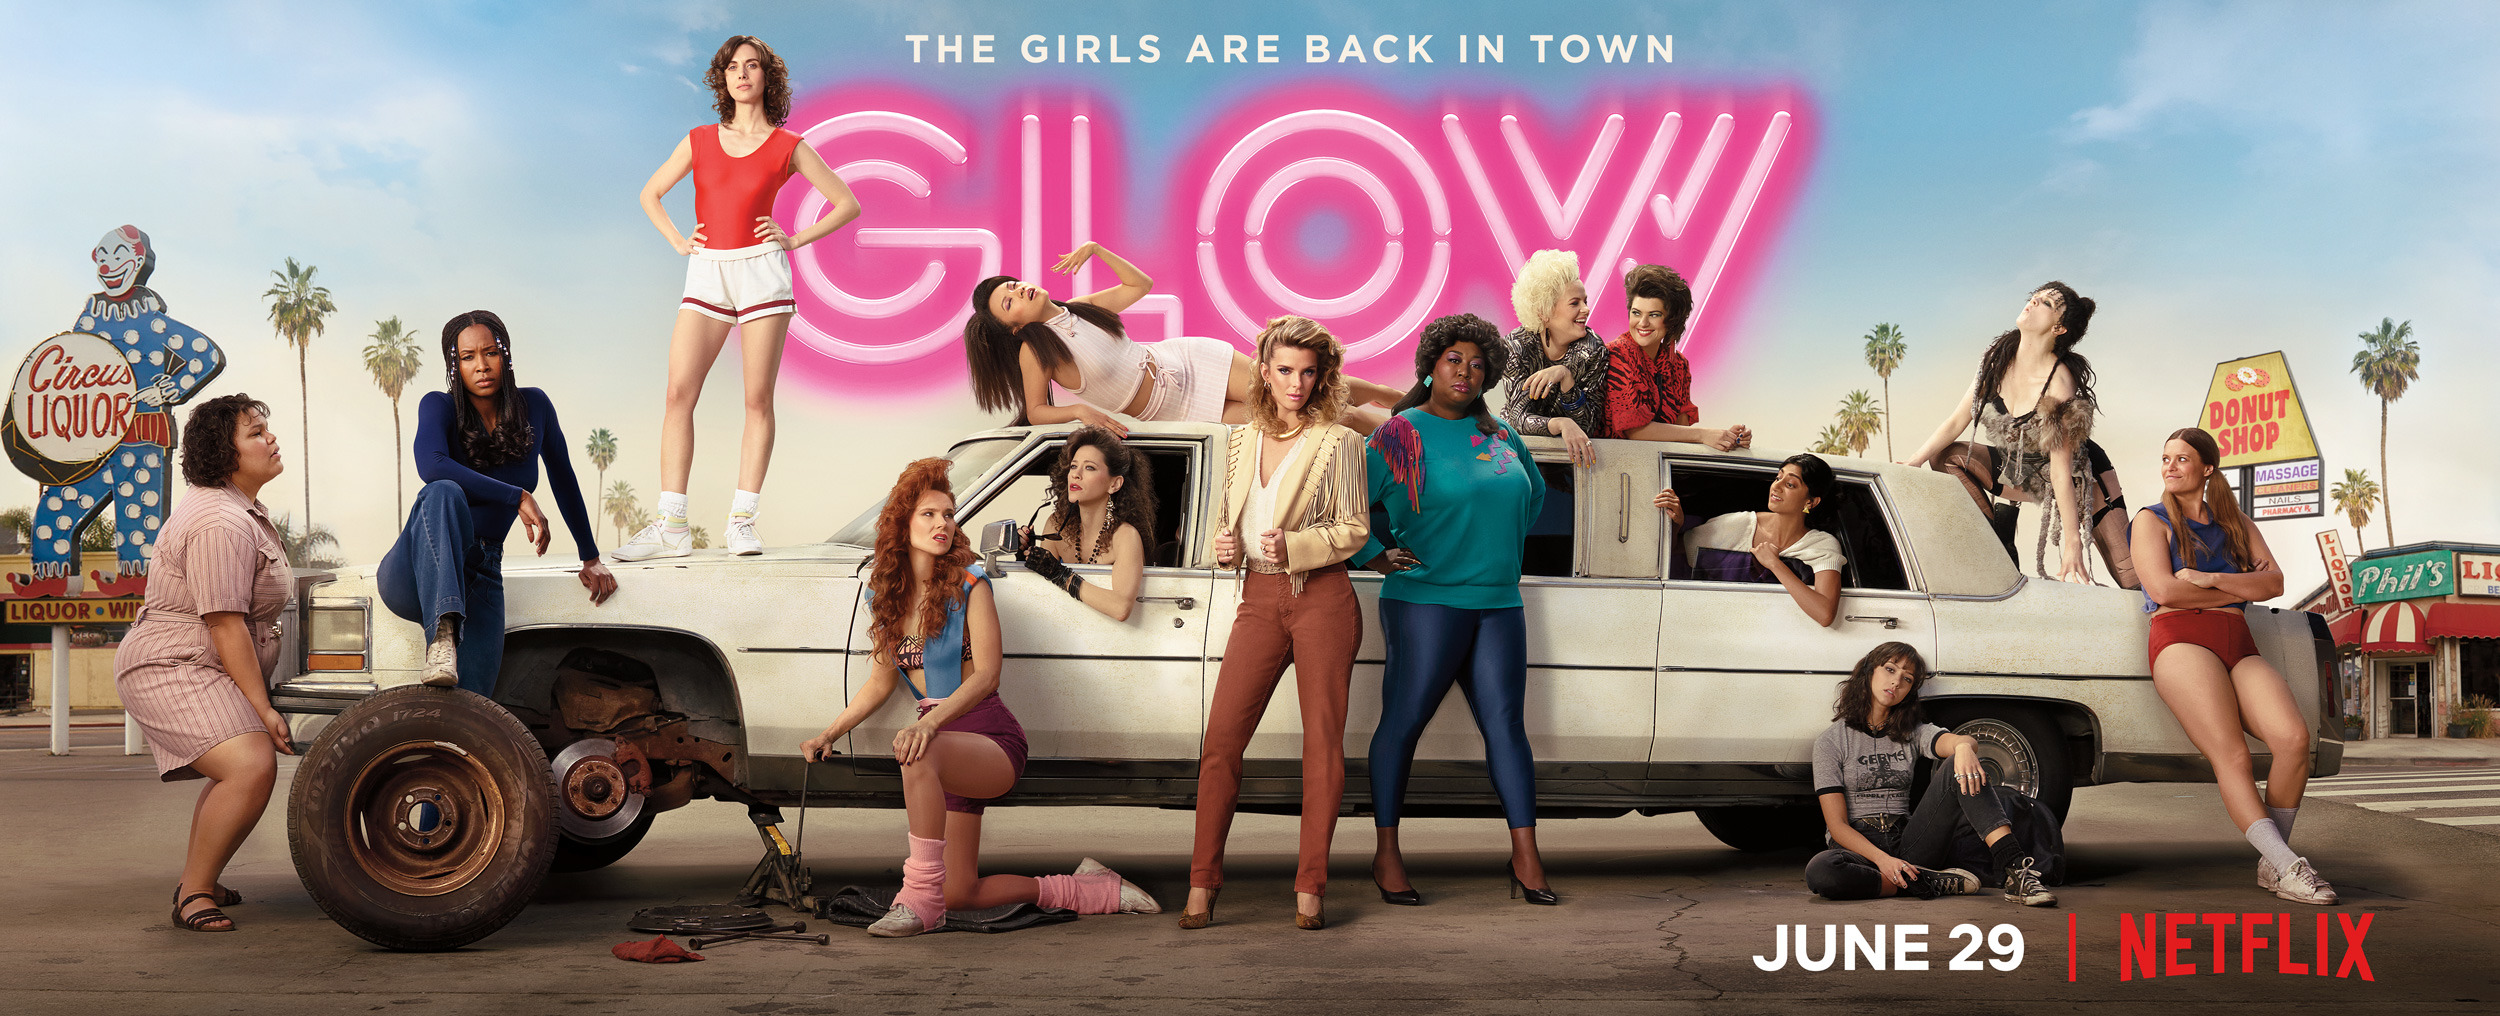 Mega Sized TV Poster Image for GLOW (#8 of 9)